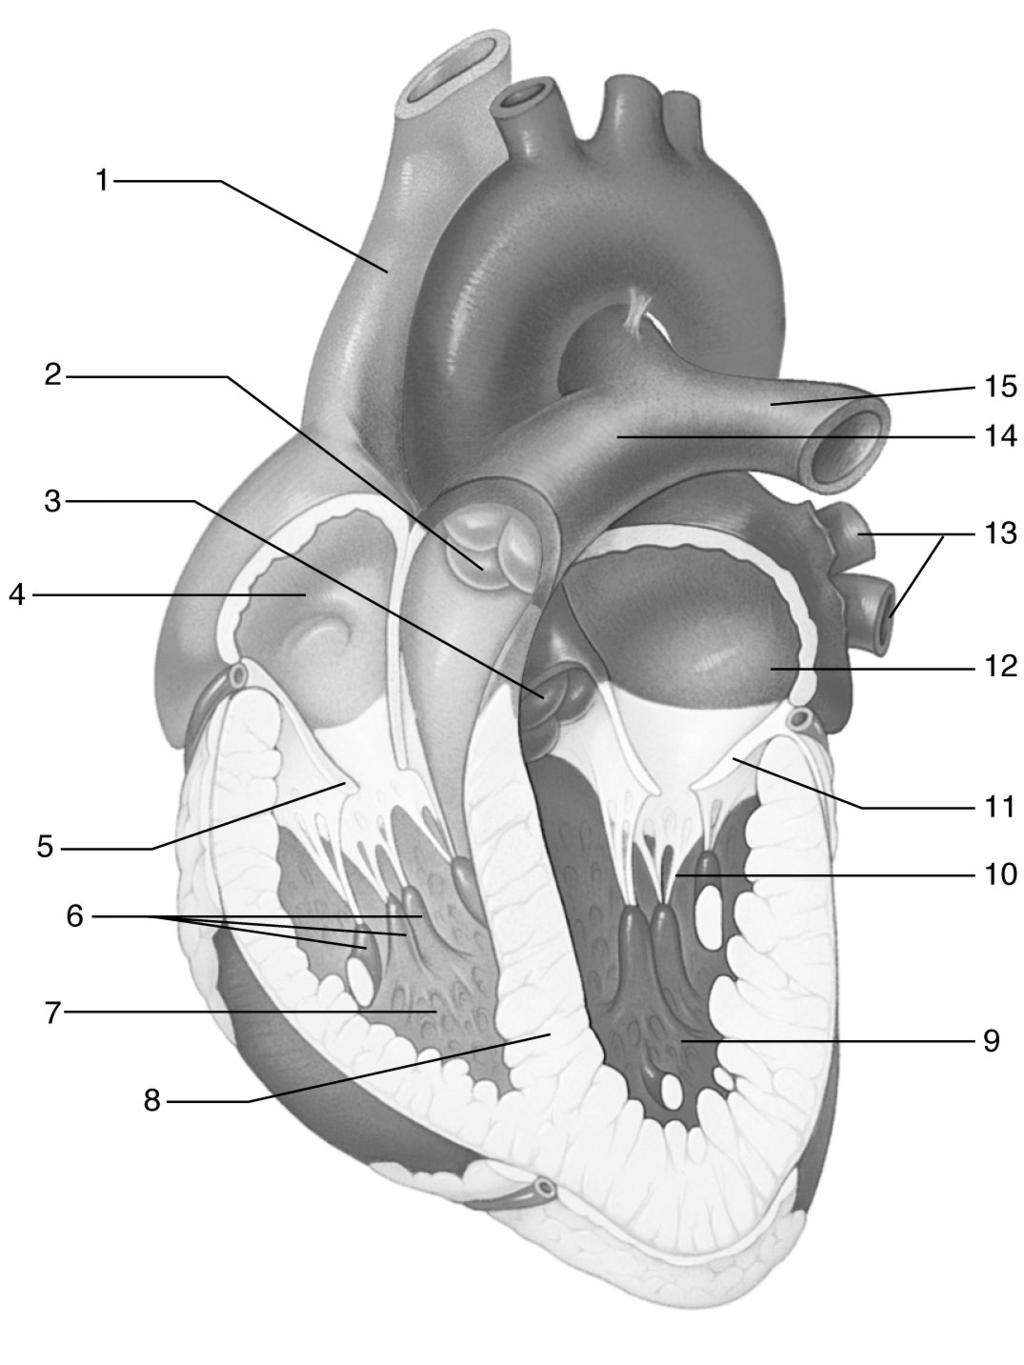 B. Match these terms with Aorta Pulmonary artery the correct parts labeled Aortic semilunar valve Pulmonary semilunar valve in figure 12.